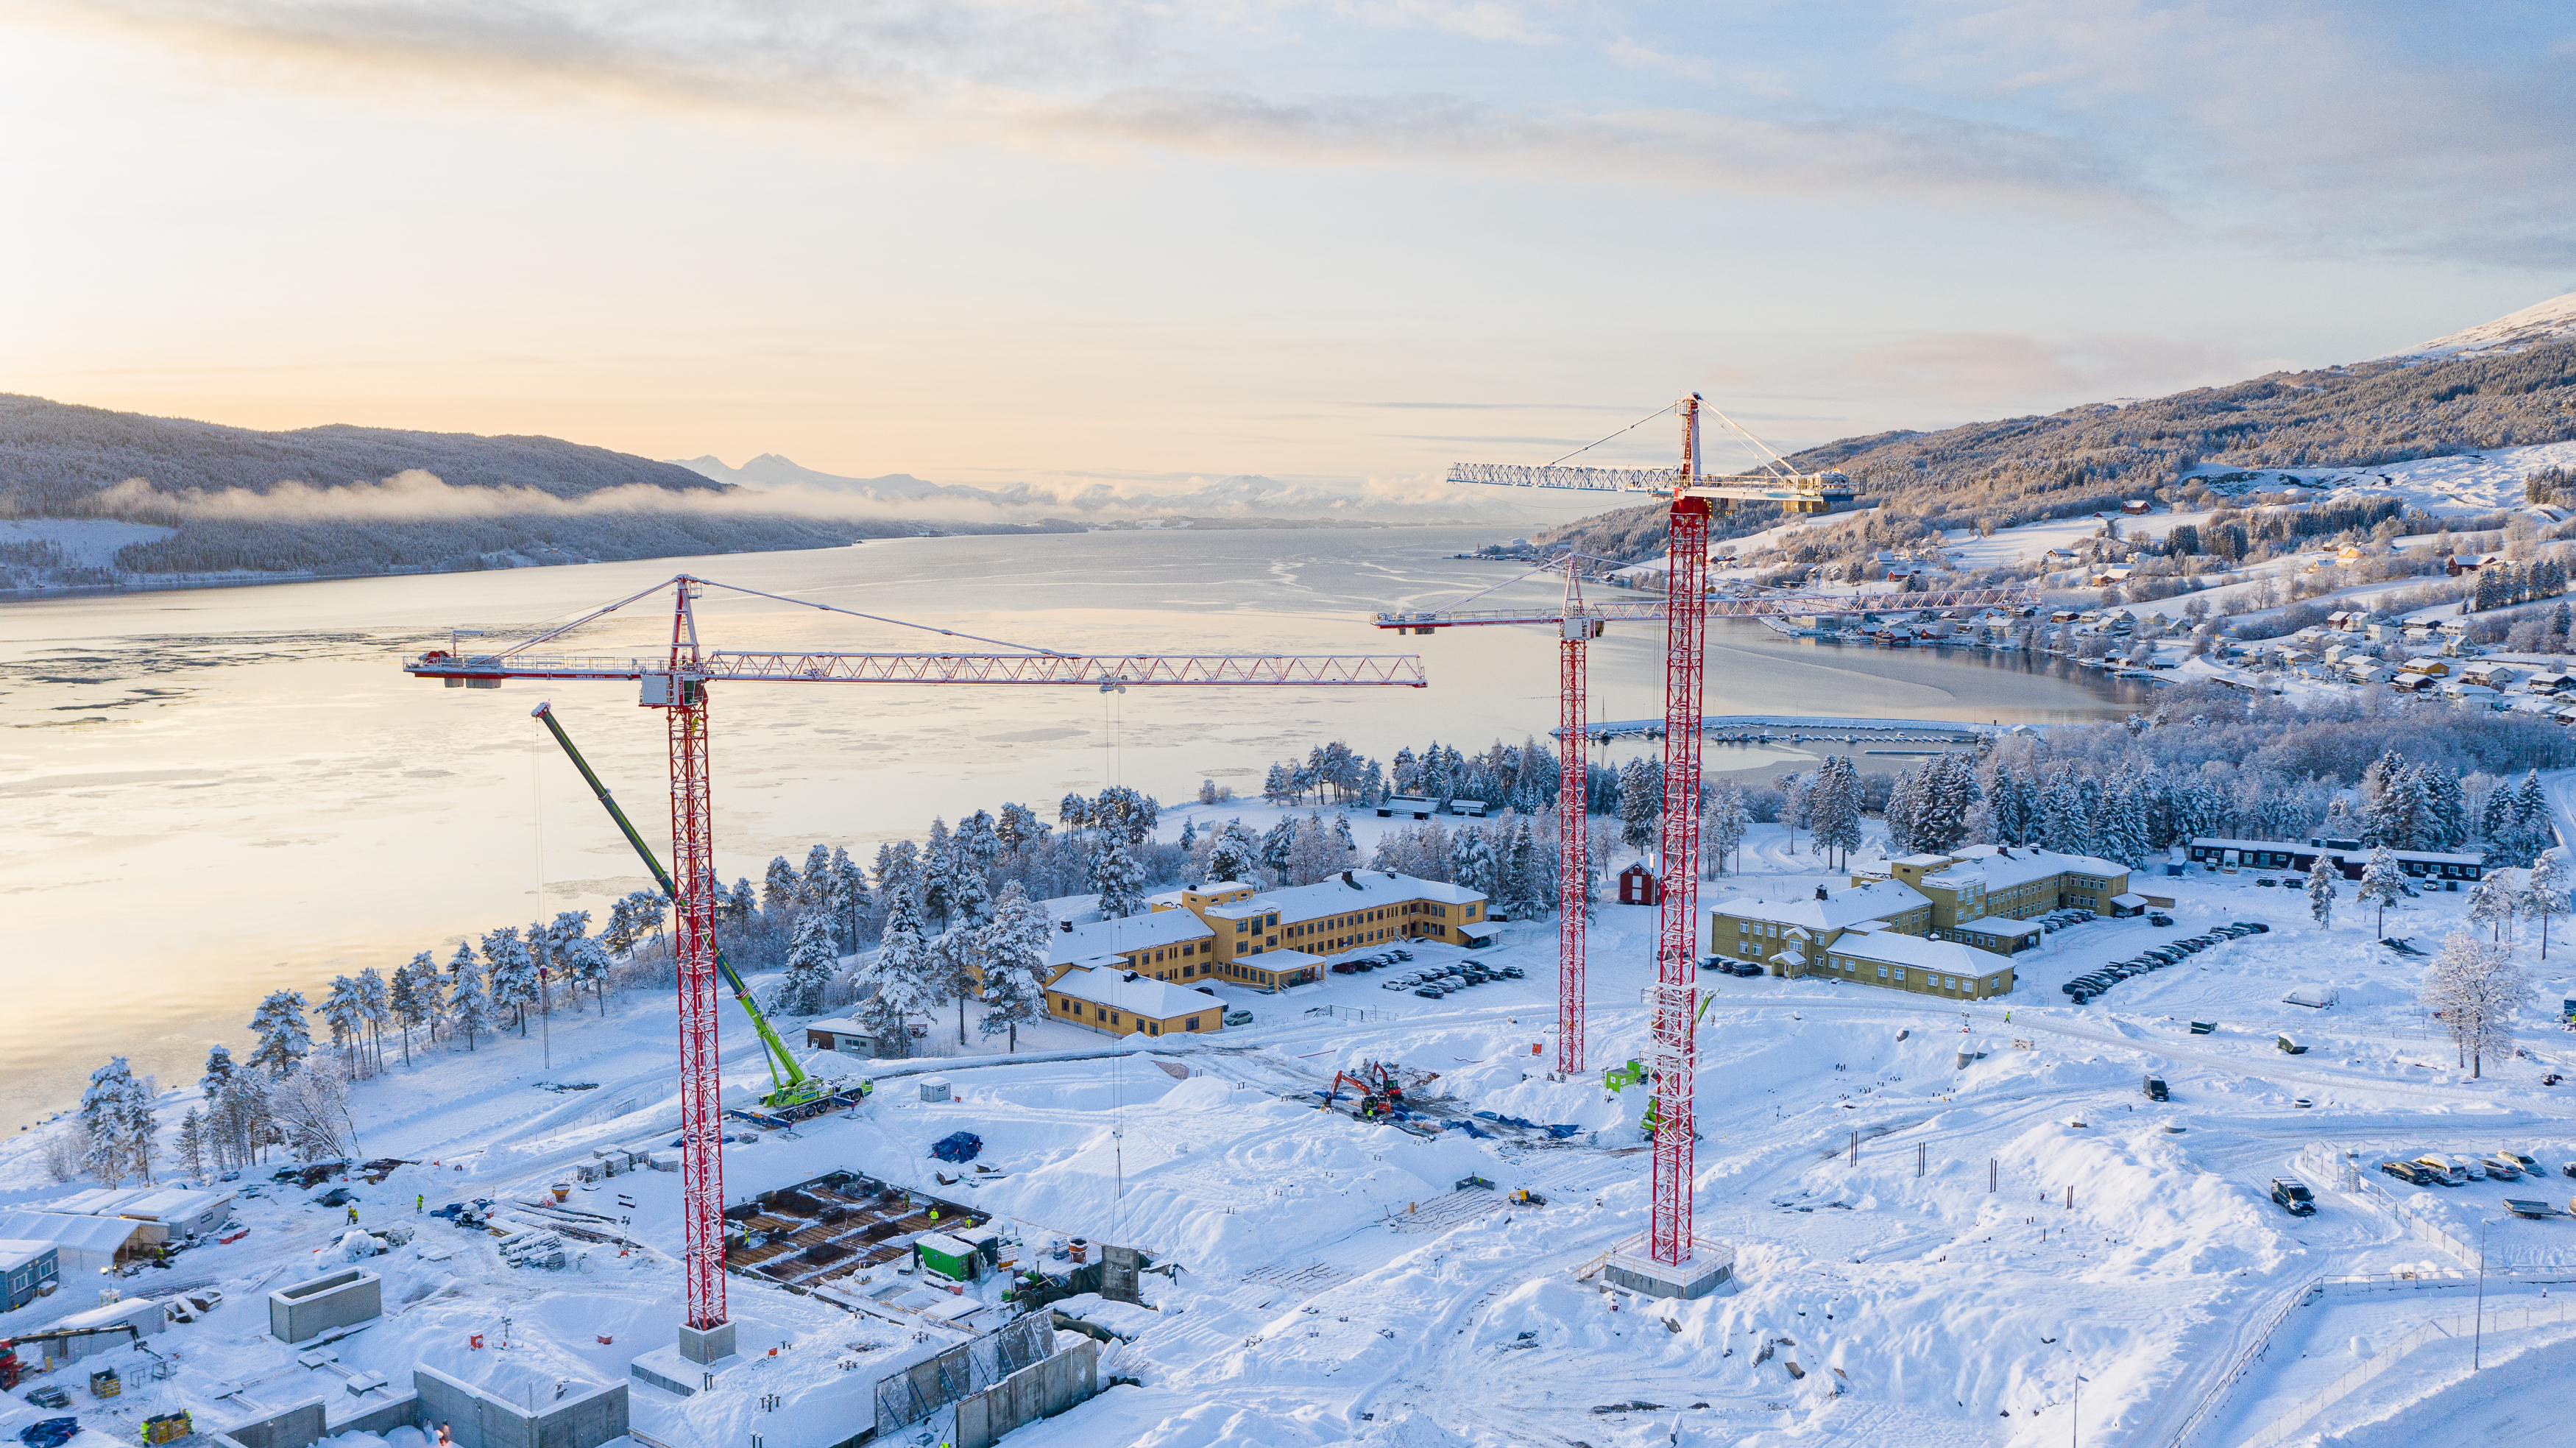 At the start of the joint venture, three WOLFF cranes are erecting a new hospital in Molde, in the southwest of Norway. By the end of the year, Managing Director Espen Hanssen expects to see around twelve WOLFF tower cranes in use on projects throughout the country.